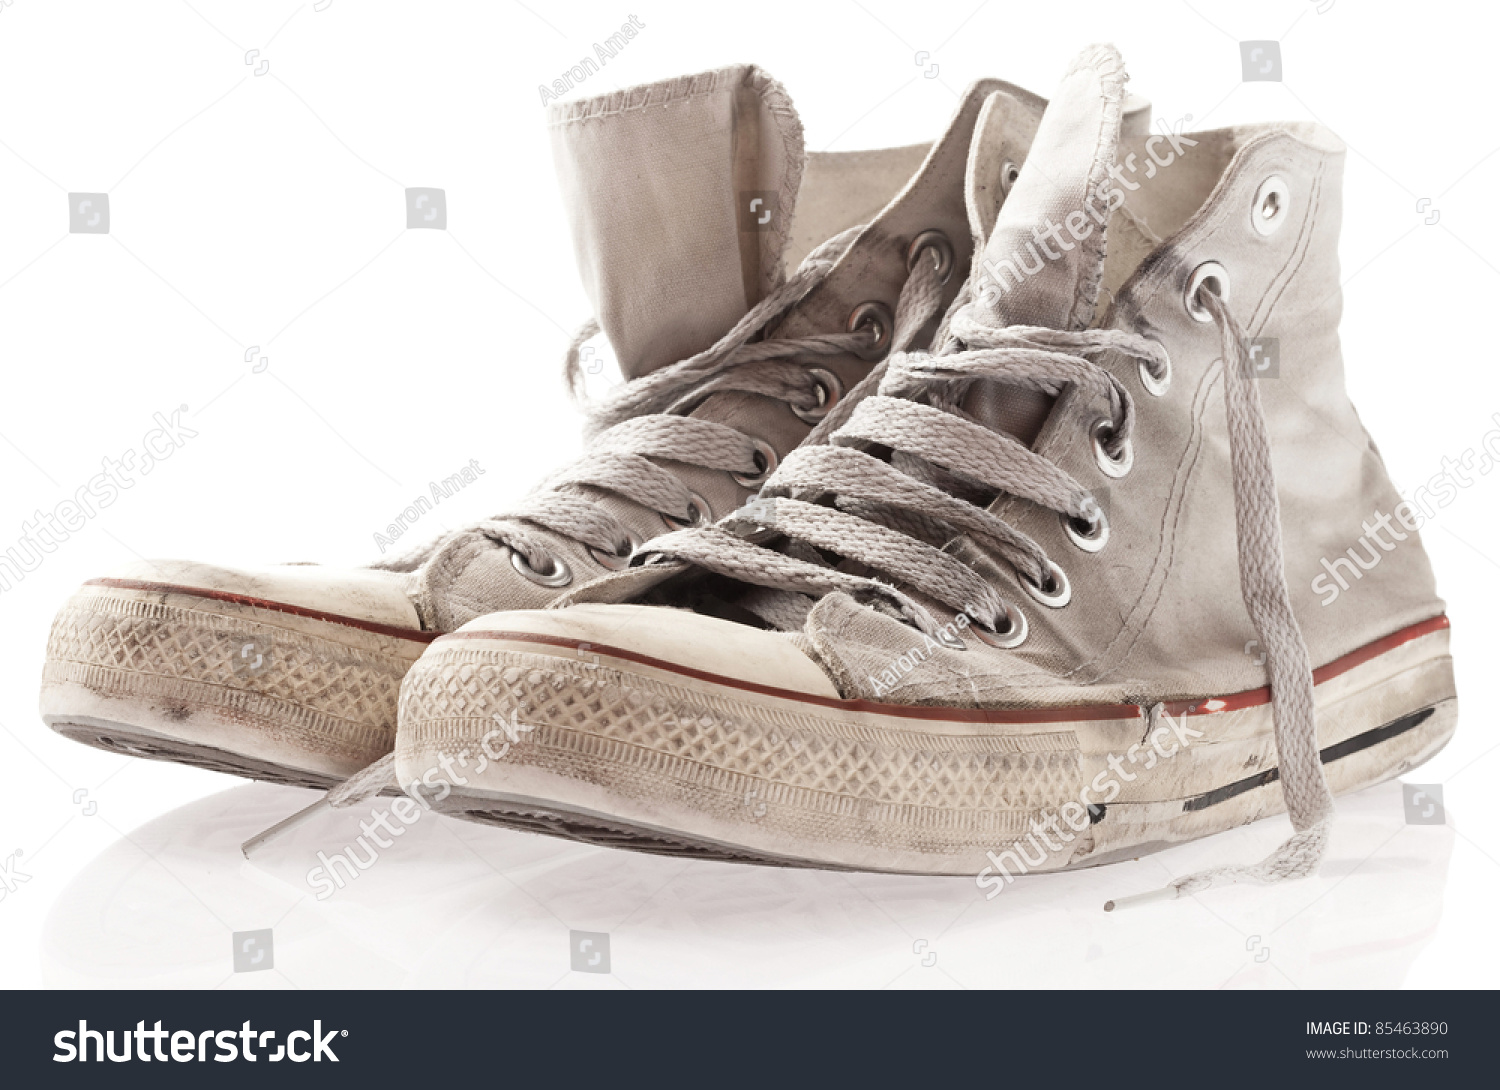 Dirty Sneakers Isolated On A White Background Stock Photo 85463890 ...